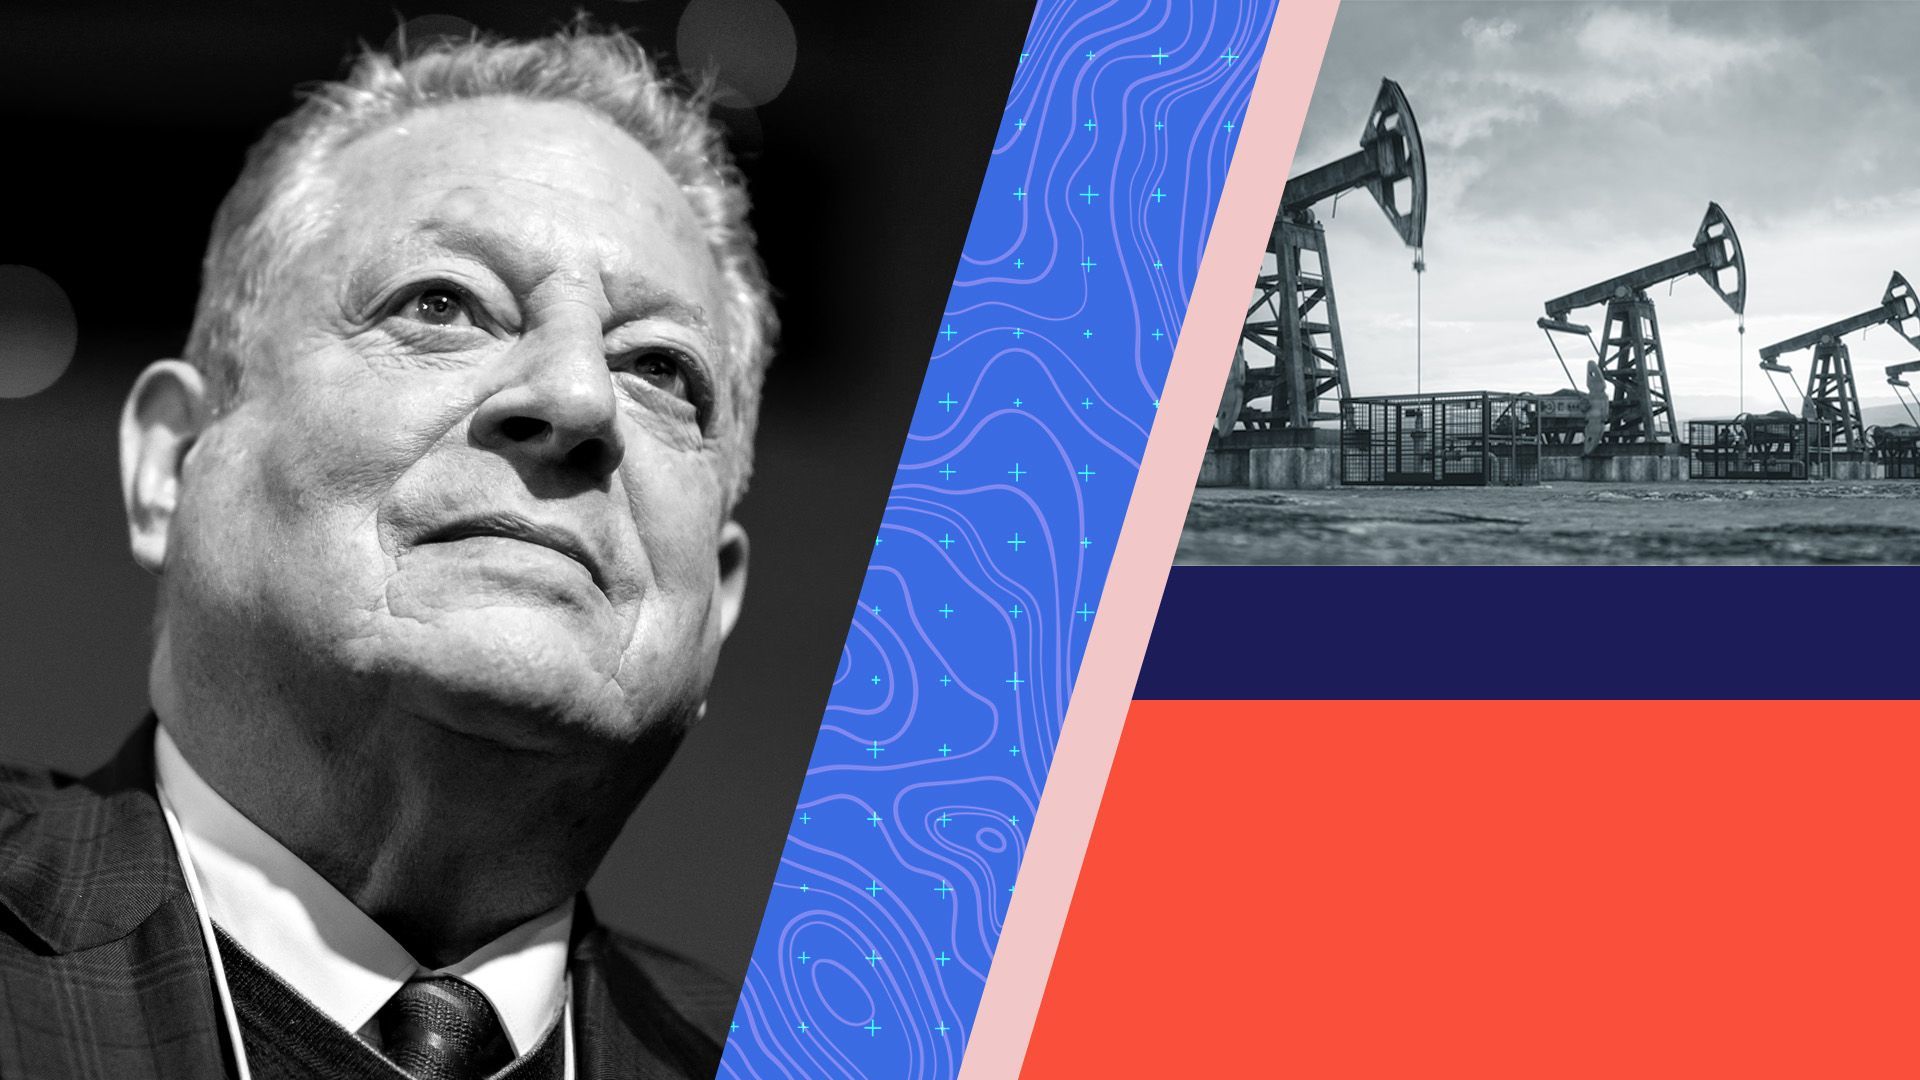 Photo illustration of Al Gore next to various shapes and a photo of an oil field